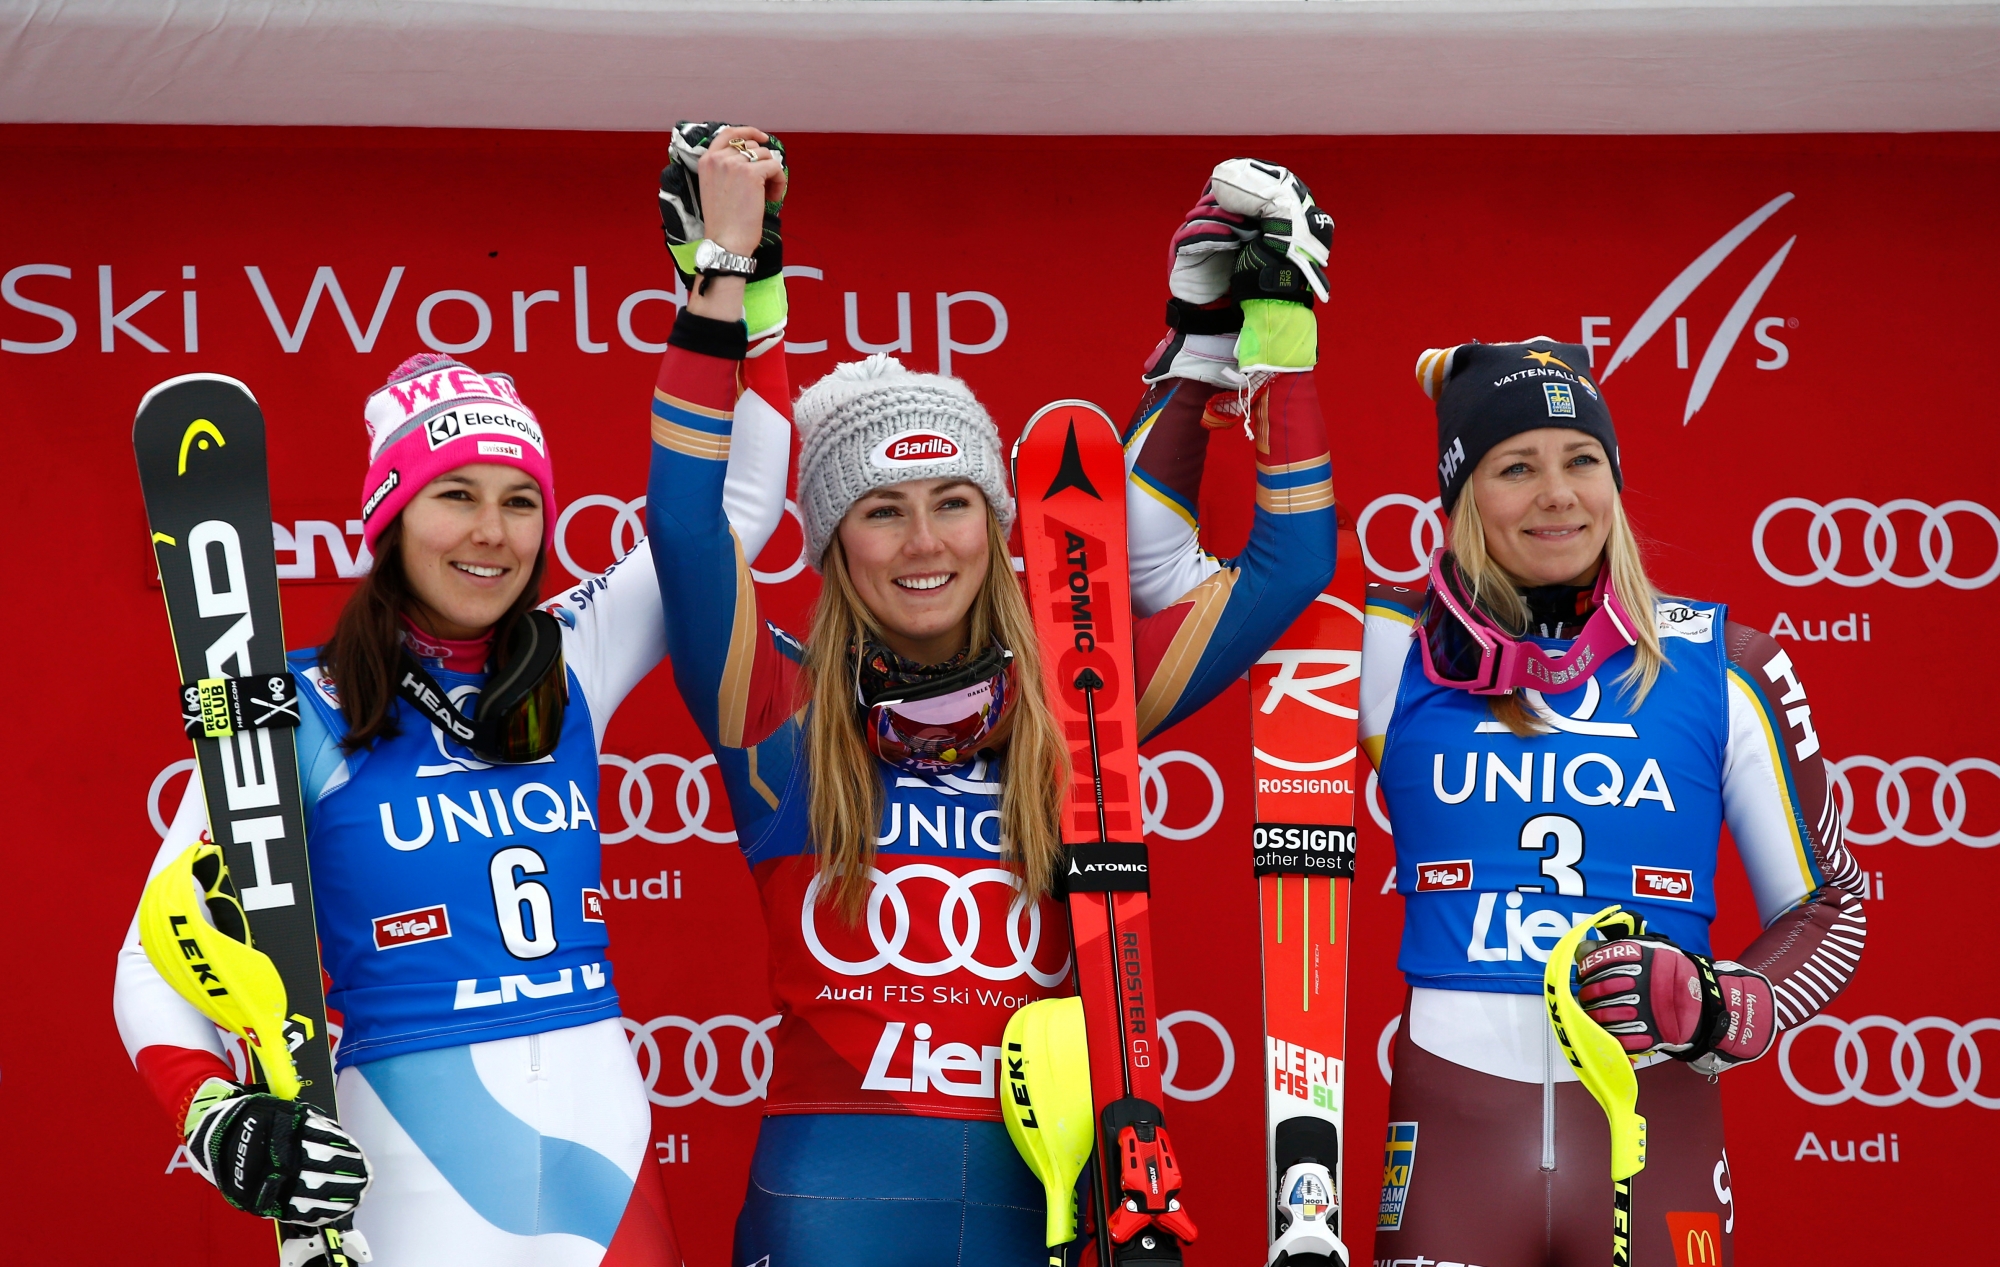 From left, second placed Switzerland's Wendy Holdener, first placed United States' Mikaela Shiffrin and third placed Sweden's Frida Hansdotter celebrate on the podium of an alpine ski, women's World Cup slalom, in Lienz, Austria, Thursday, Dec. 28, 2017. (AP Photo/Giovanni Auletta) Austria Alpine Skiing World Cup